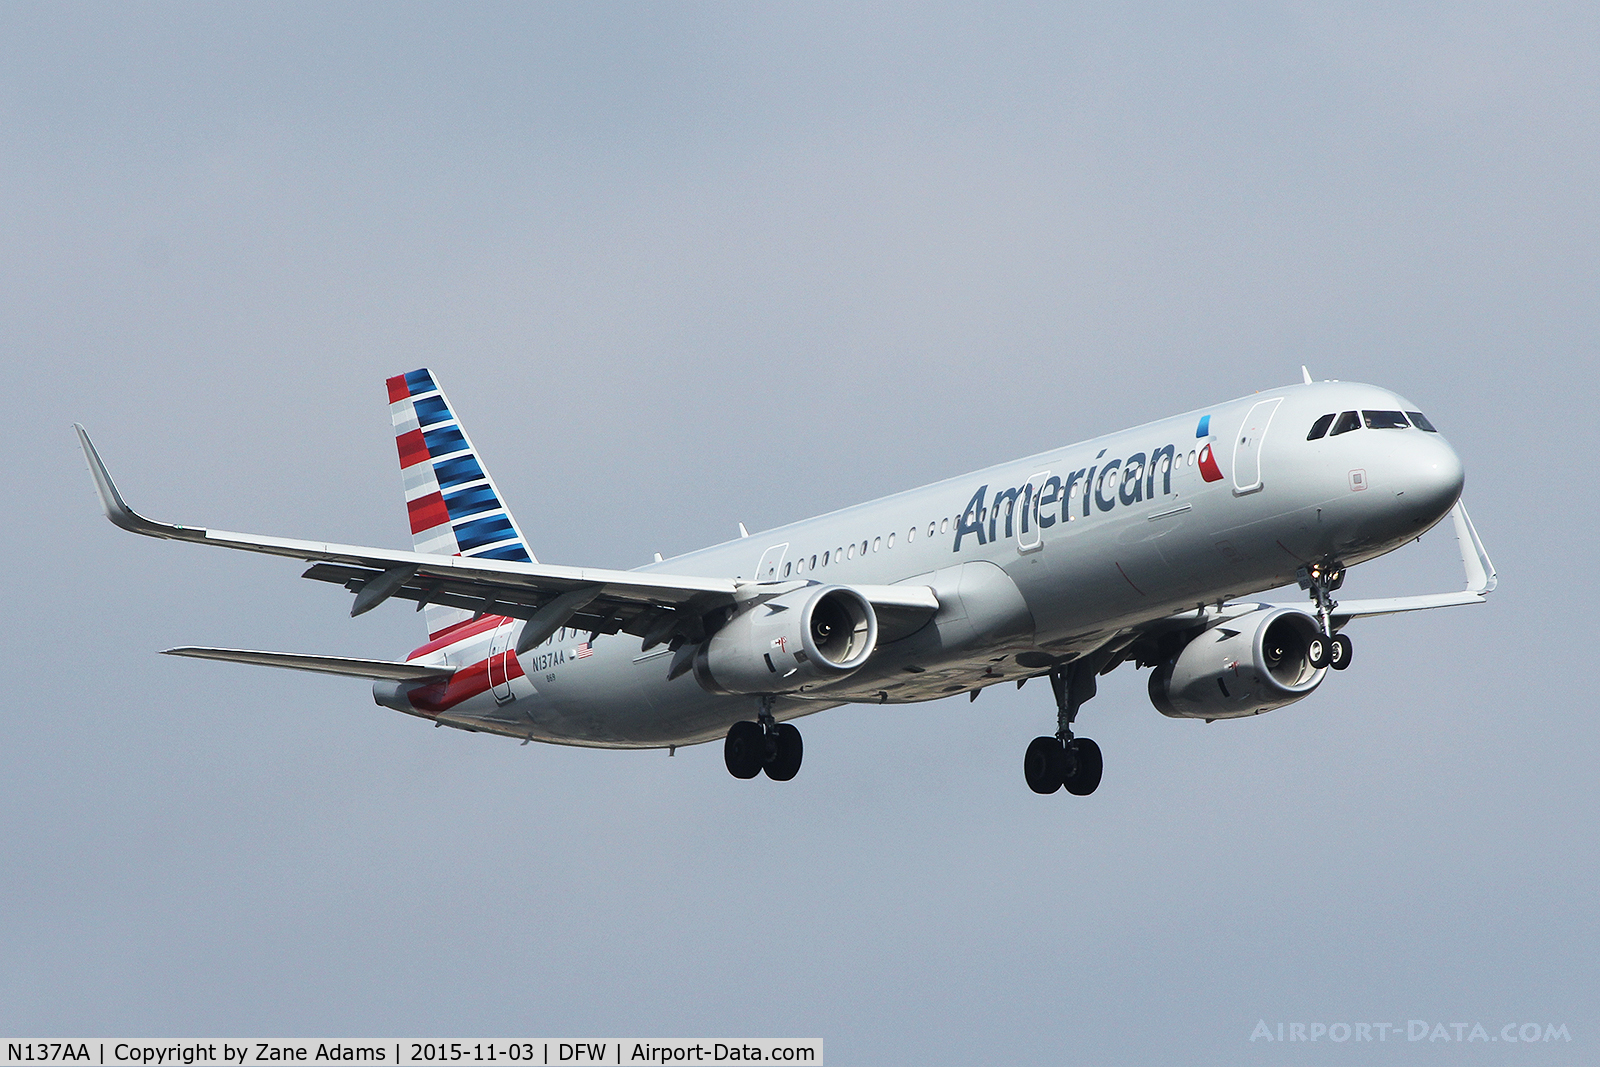 N137AA, 2015 Airbus A321-231 C/N 6647, Arriving at DFW Airport